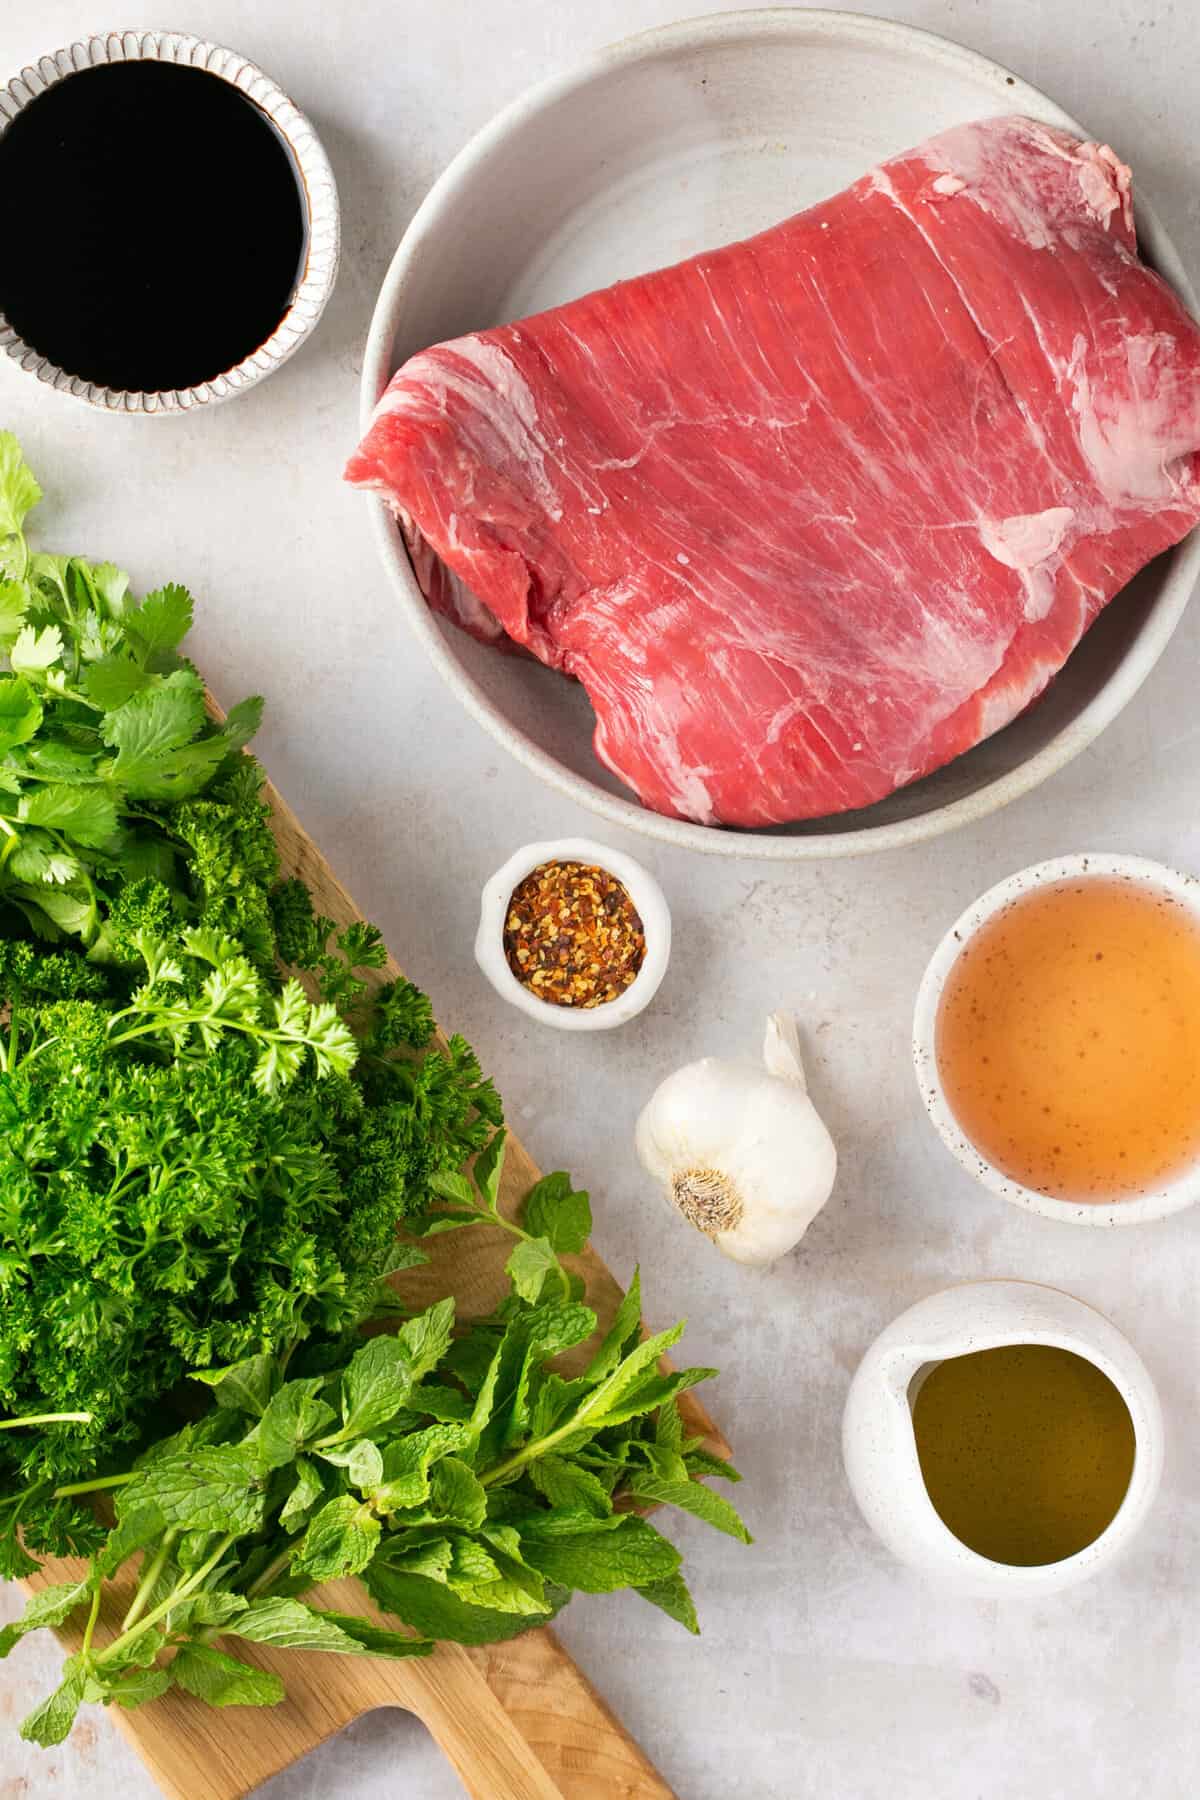 ingredients needed for making bavette steak and chimichurri sauce